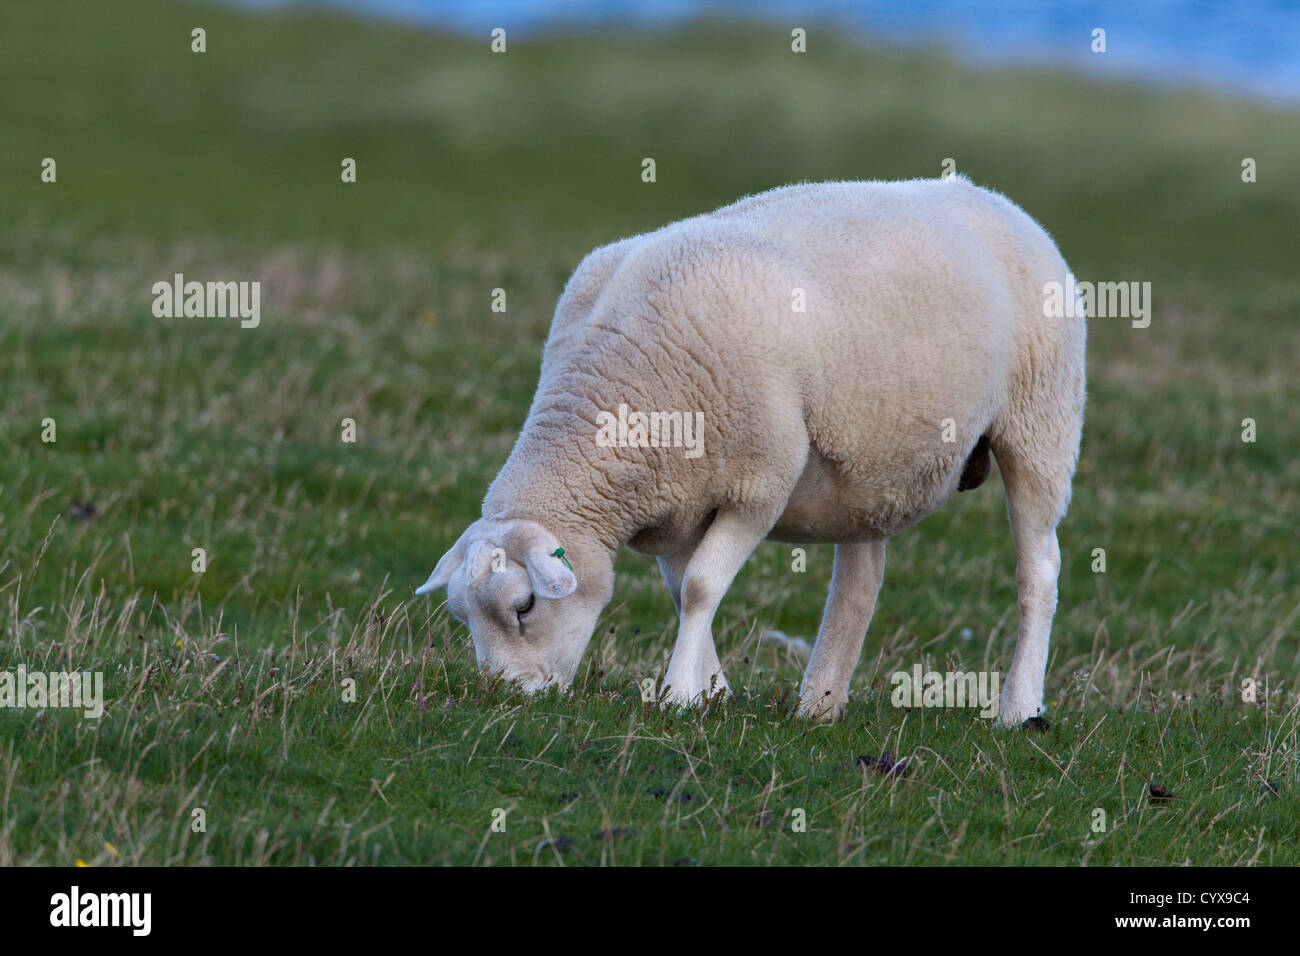 Texel Sheep (Ovis aries). Grazing. Here on Iona, Inner Hebrides. Introduced breed from The Netherlands to UK. Stock Photo